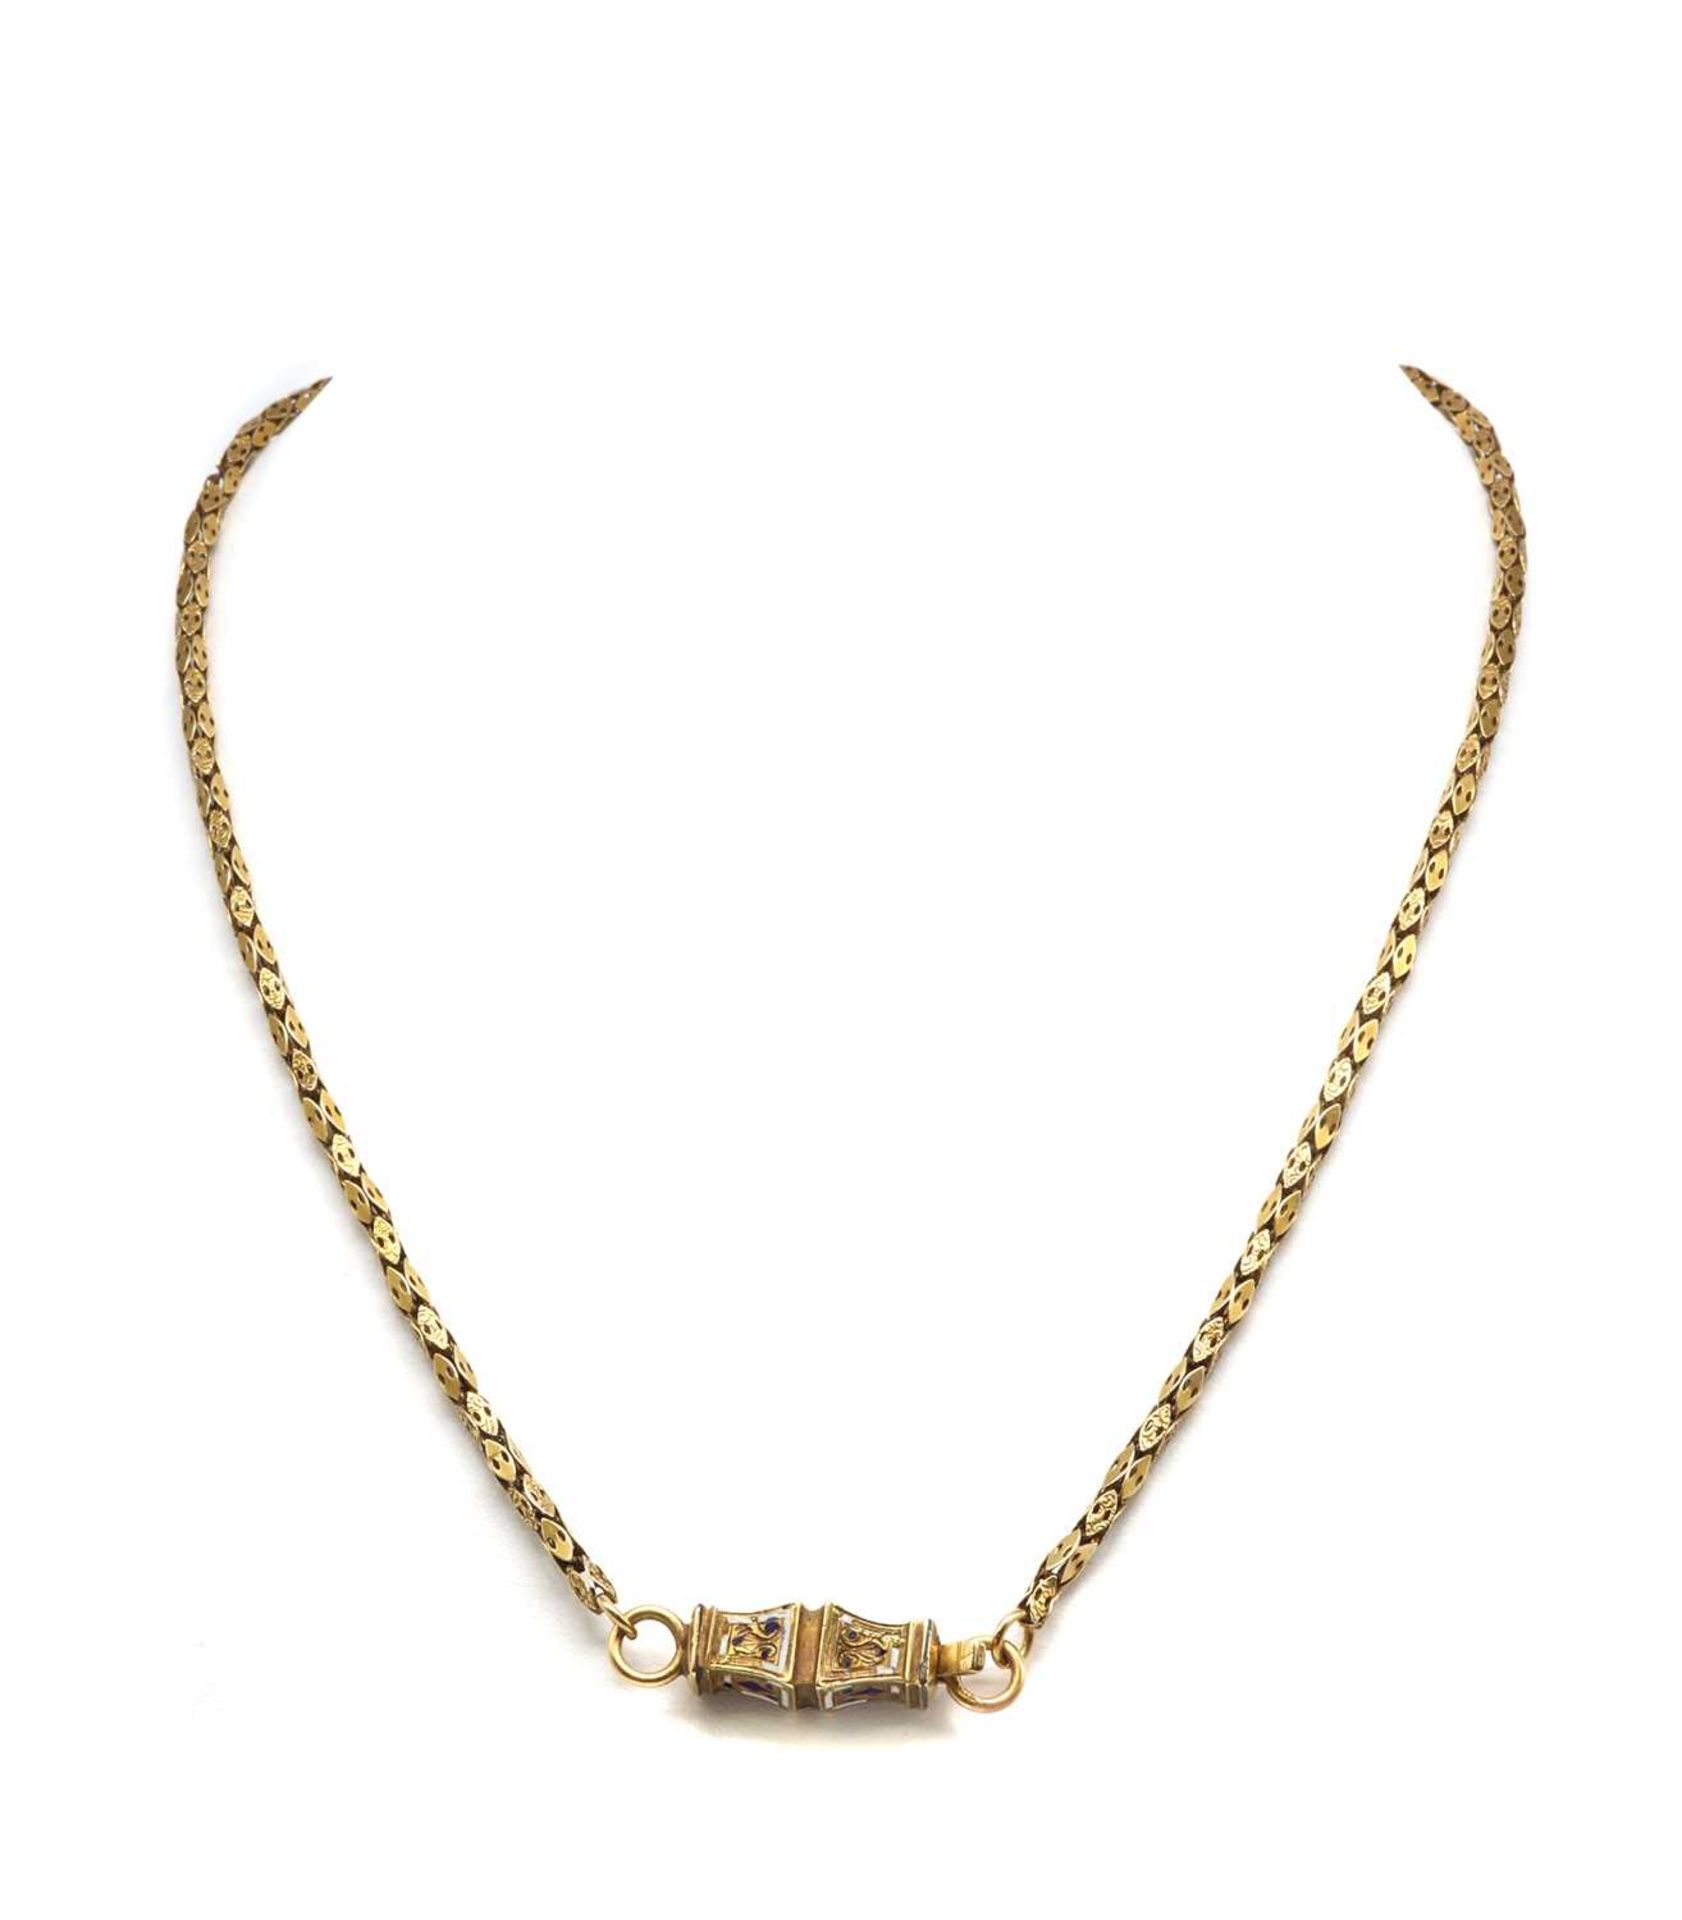 A gold chain with enamel clasp,